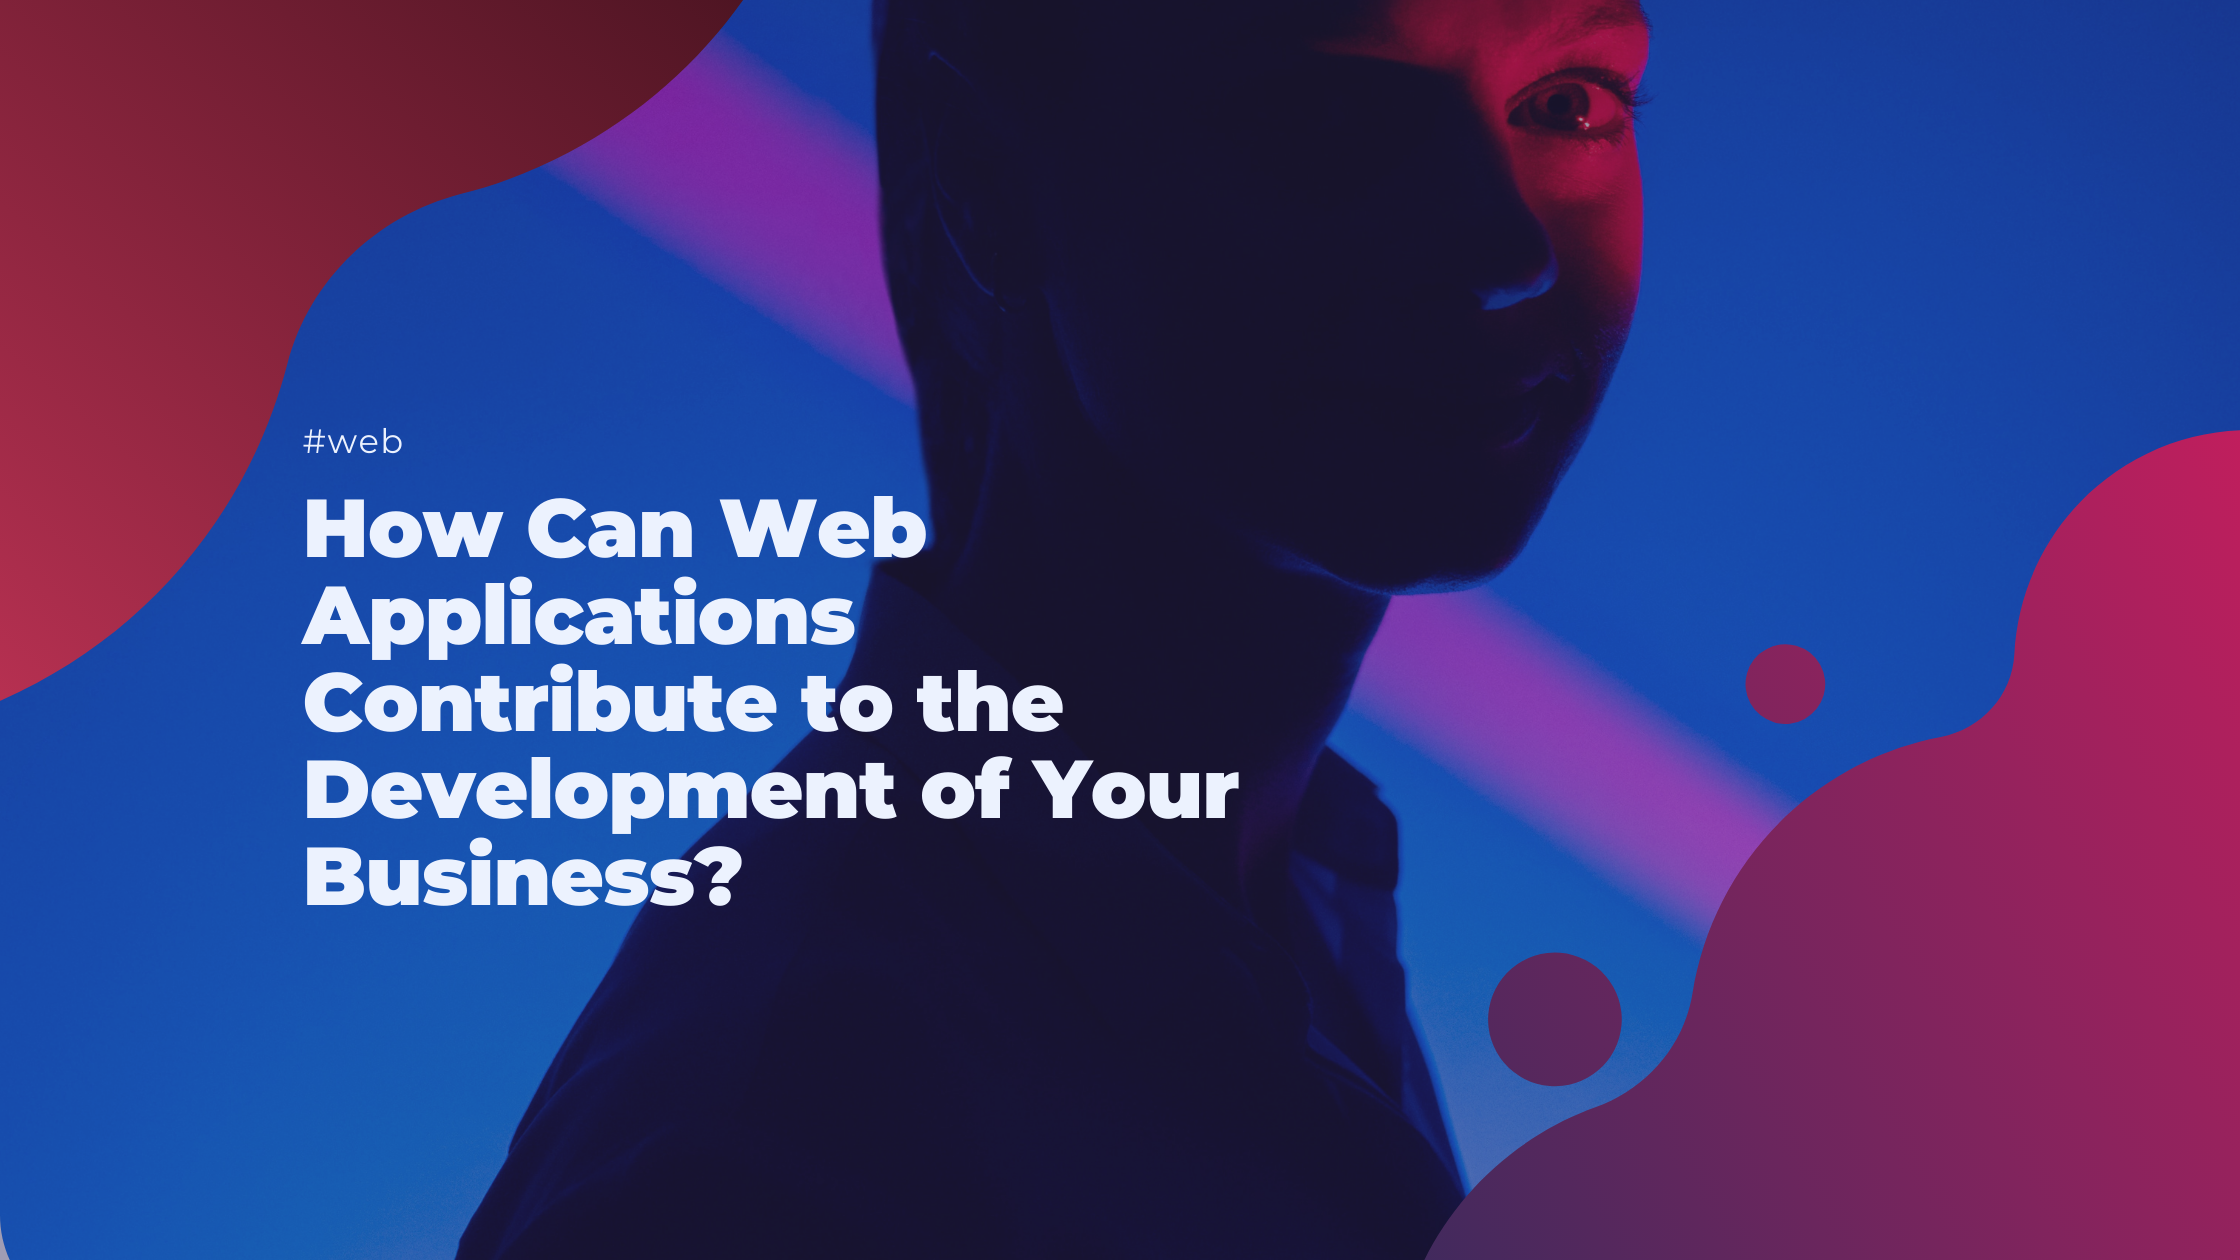 How Can Web Applications Contribute to the Development of Your Business?